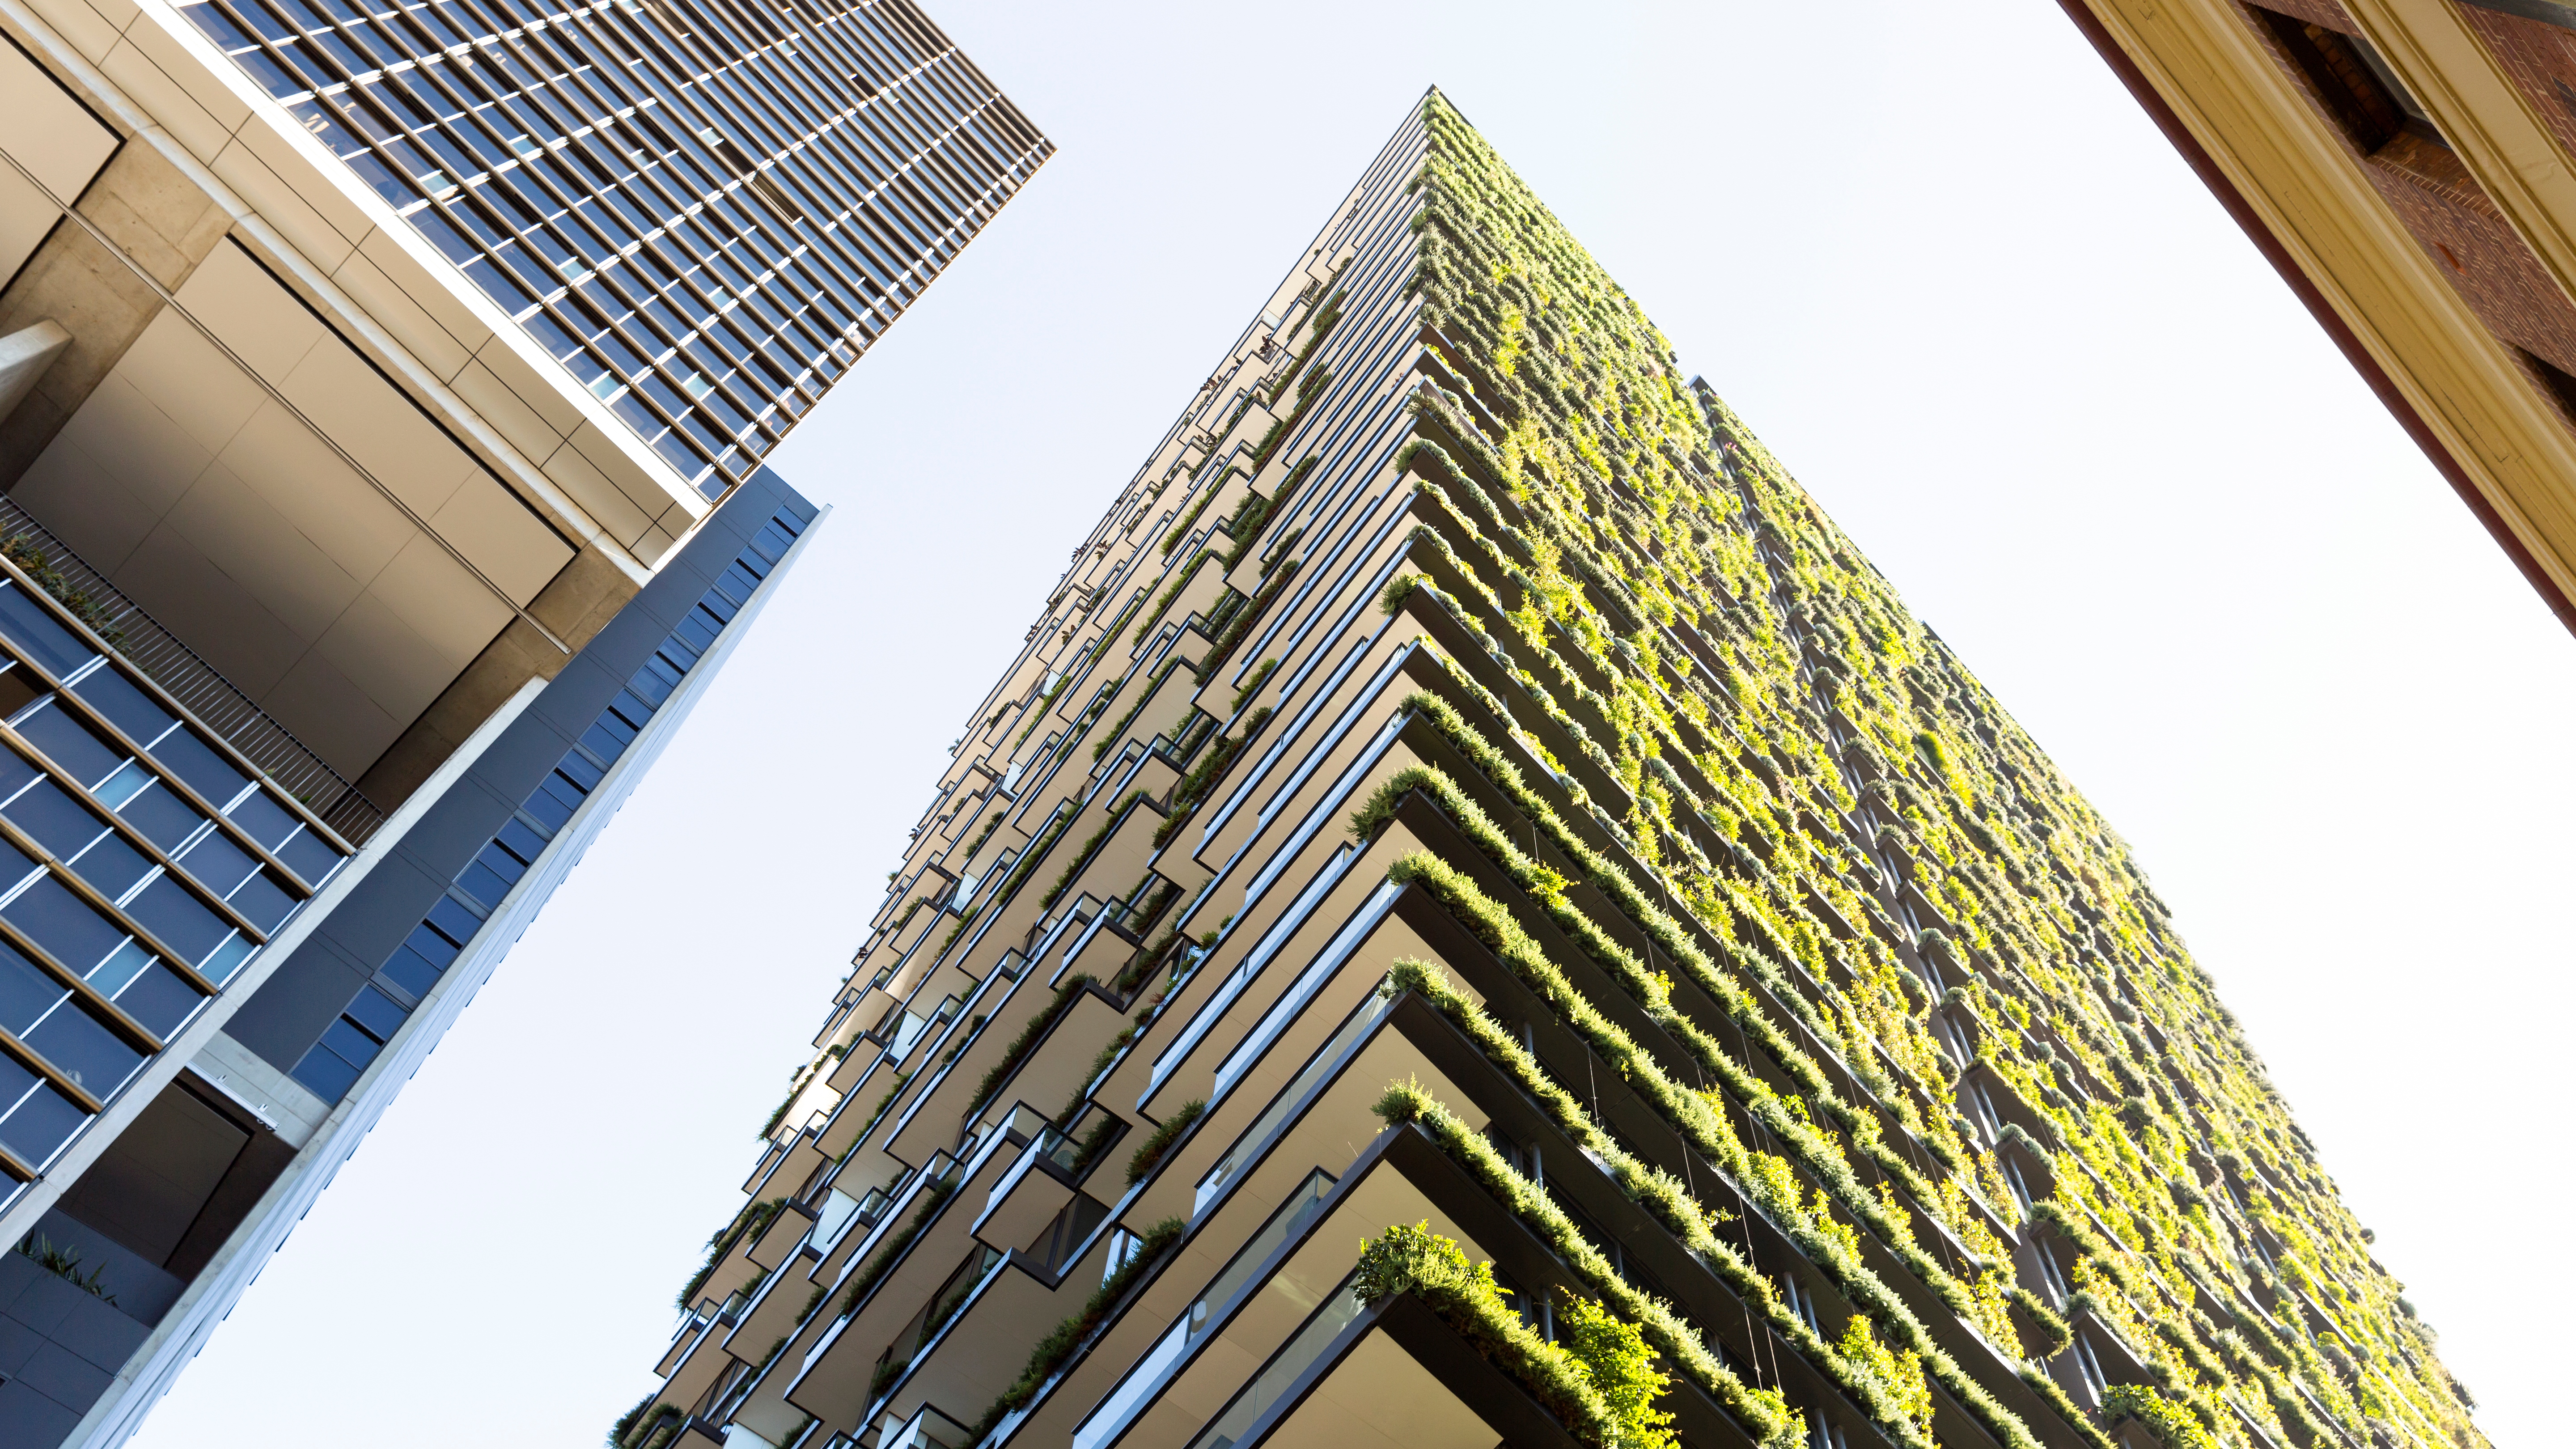 Low angle view of vertical garden-BioWall or living wall is a wall covered with living plants on high rise residential building, Sydney Australia, full frame horizontal composition